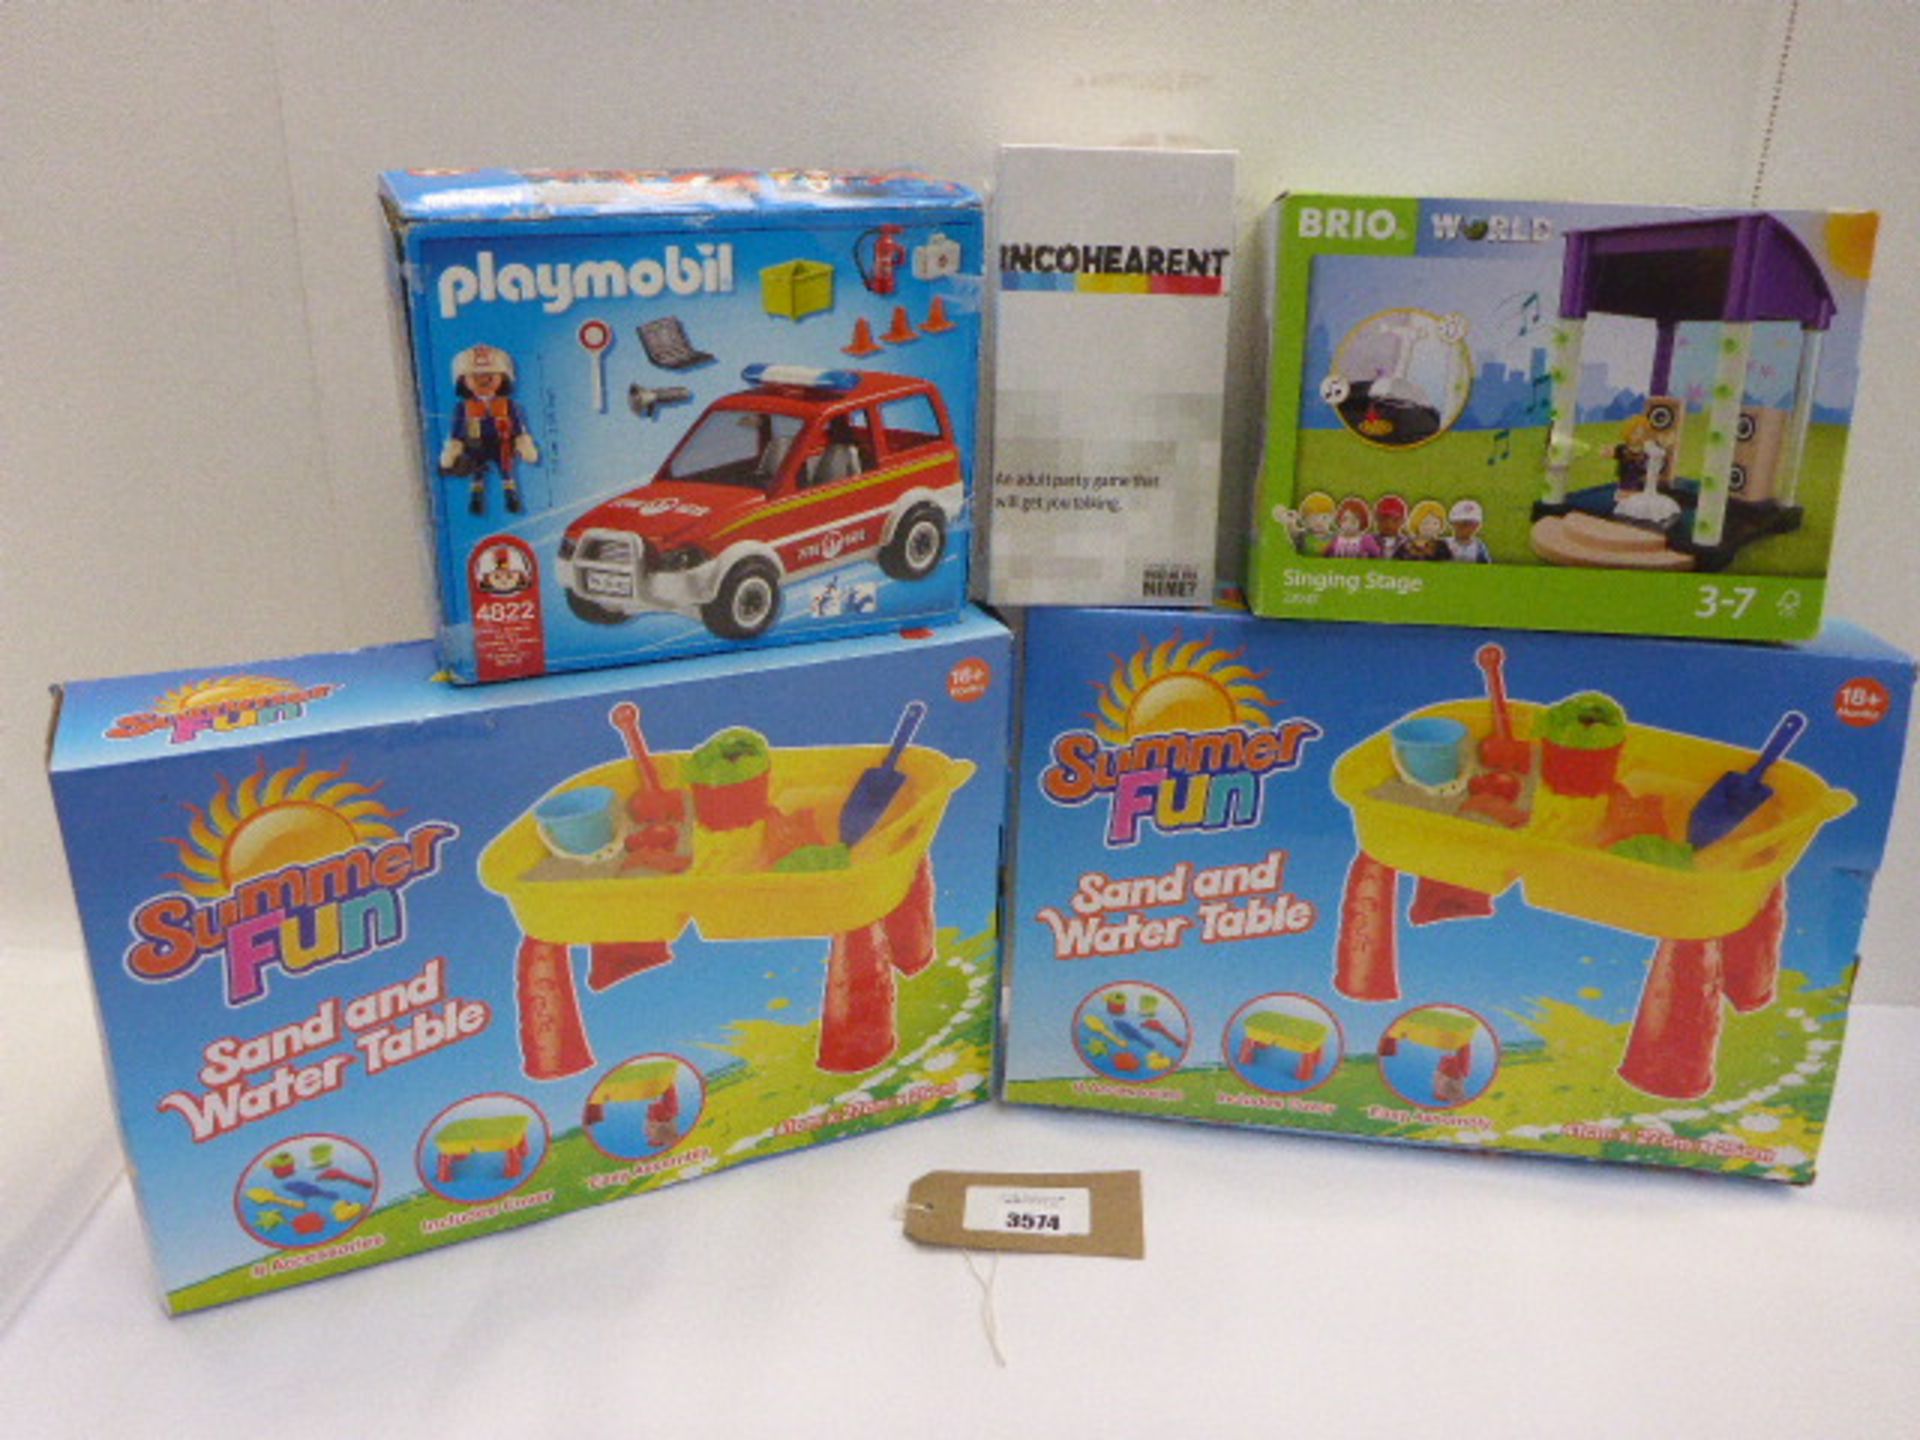 2 x Summer Fun sand and water tables, PlayMobil & Brio World model kits and Incoherent game